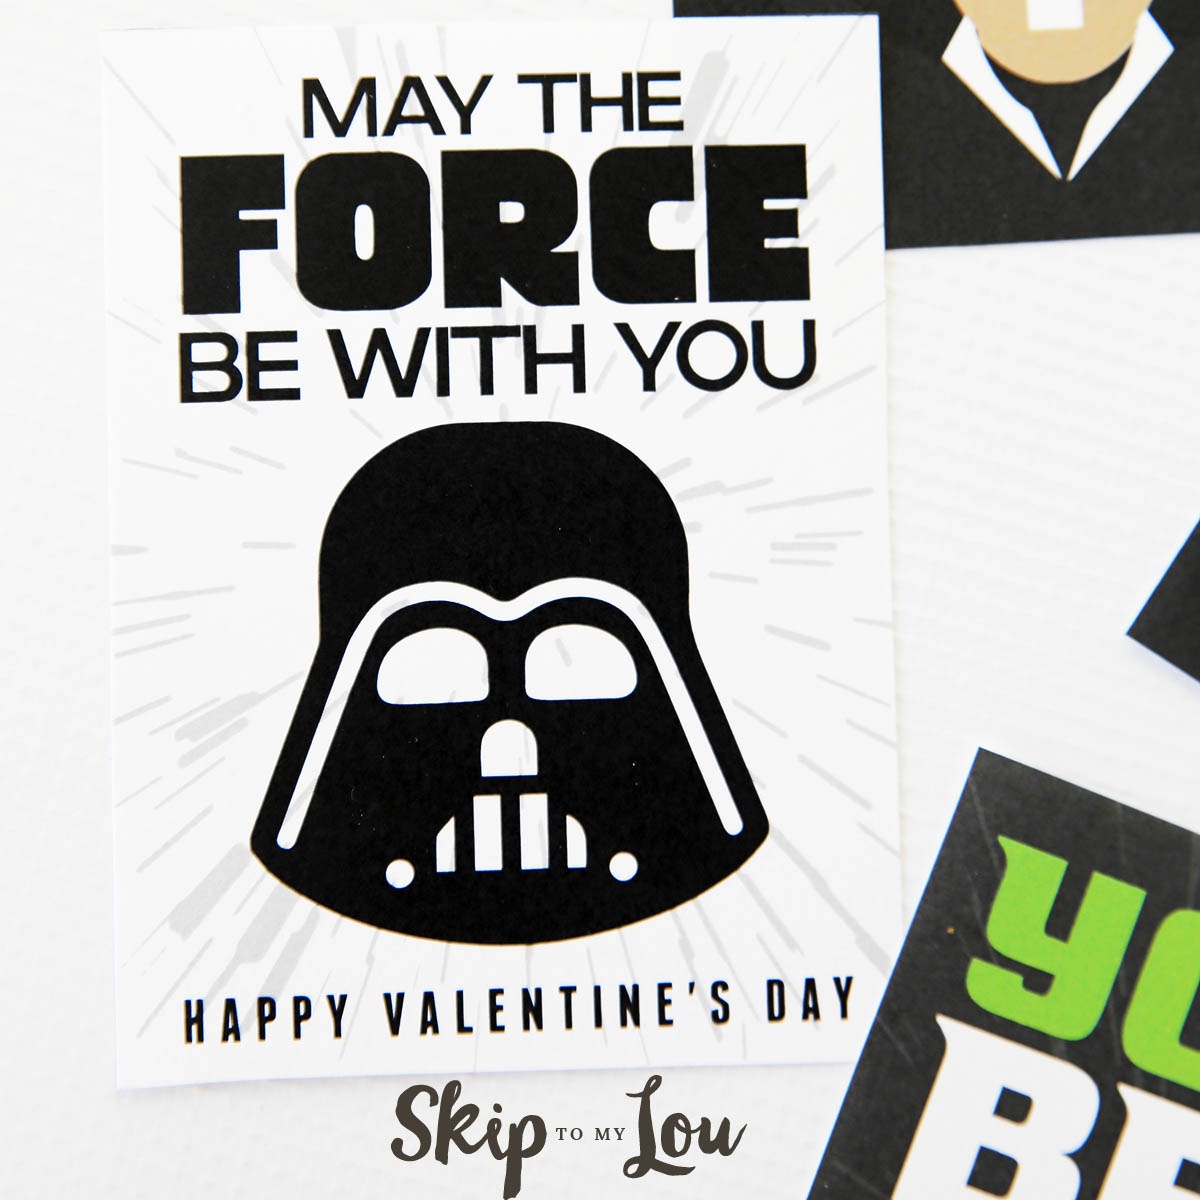 The Best Free Printable Star Wars Valentines - So Cool! | Skip To My Lou - May The Force Be With You Free Printable